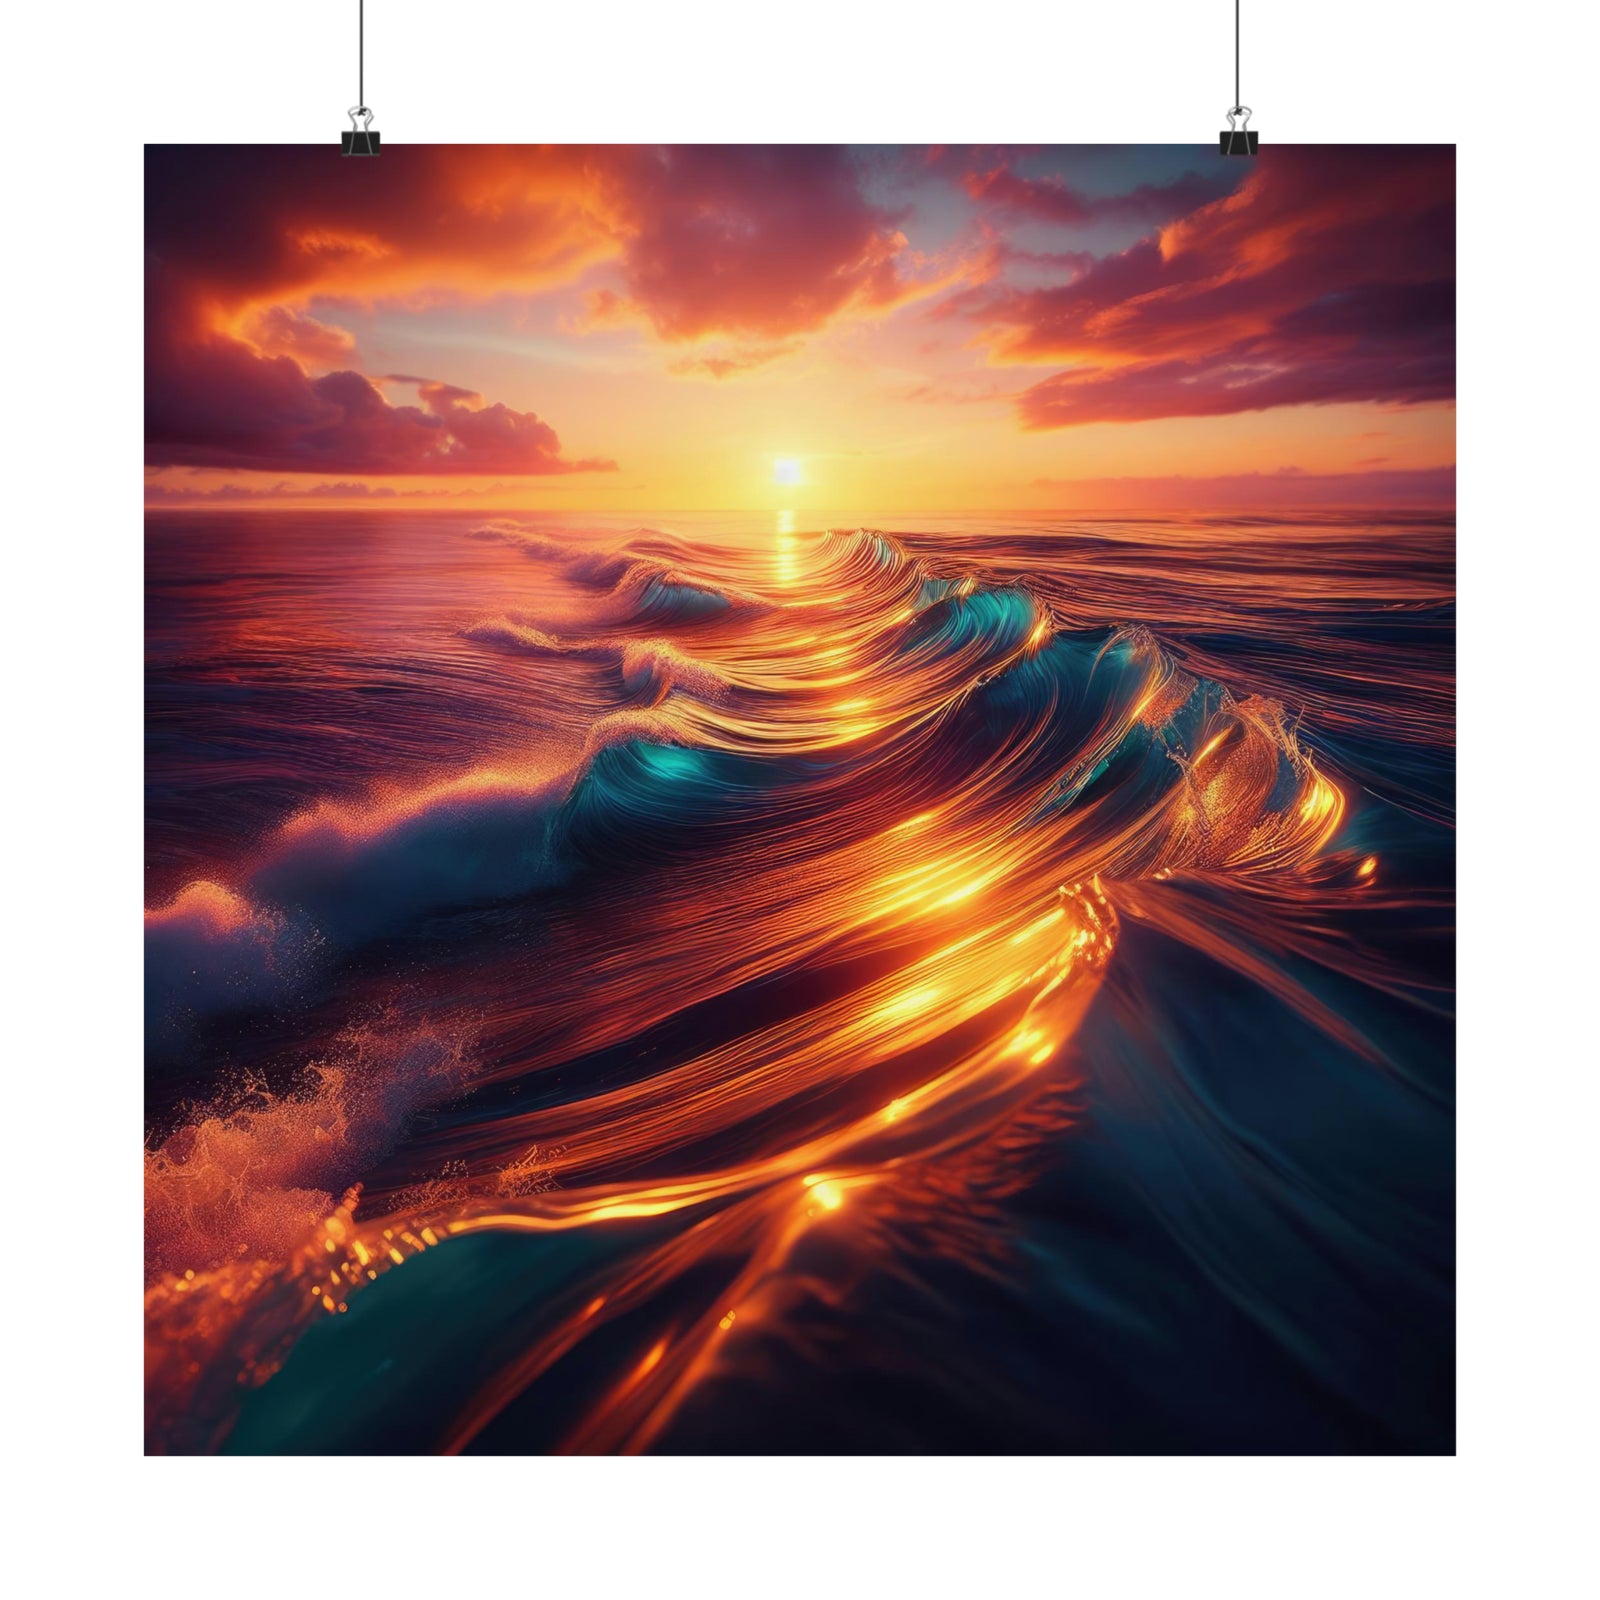 Captivated by Crisp Sunset Details on the Ocean of Hawaii Poster